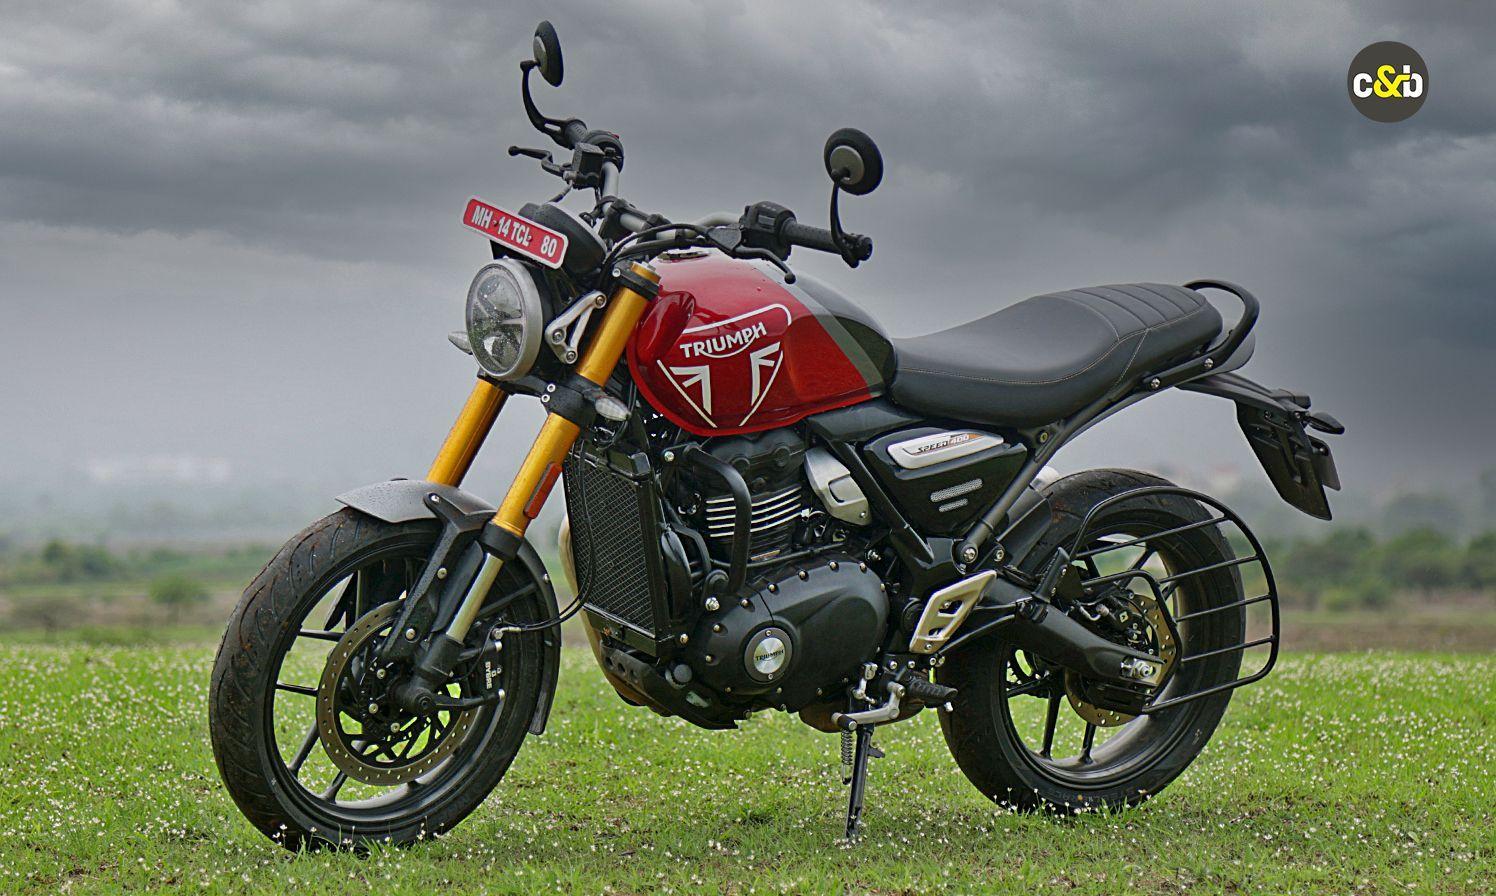 Triumph Speed 400 Introductory Price Of Rs 2.23 Lakh Extended Till December 31